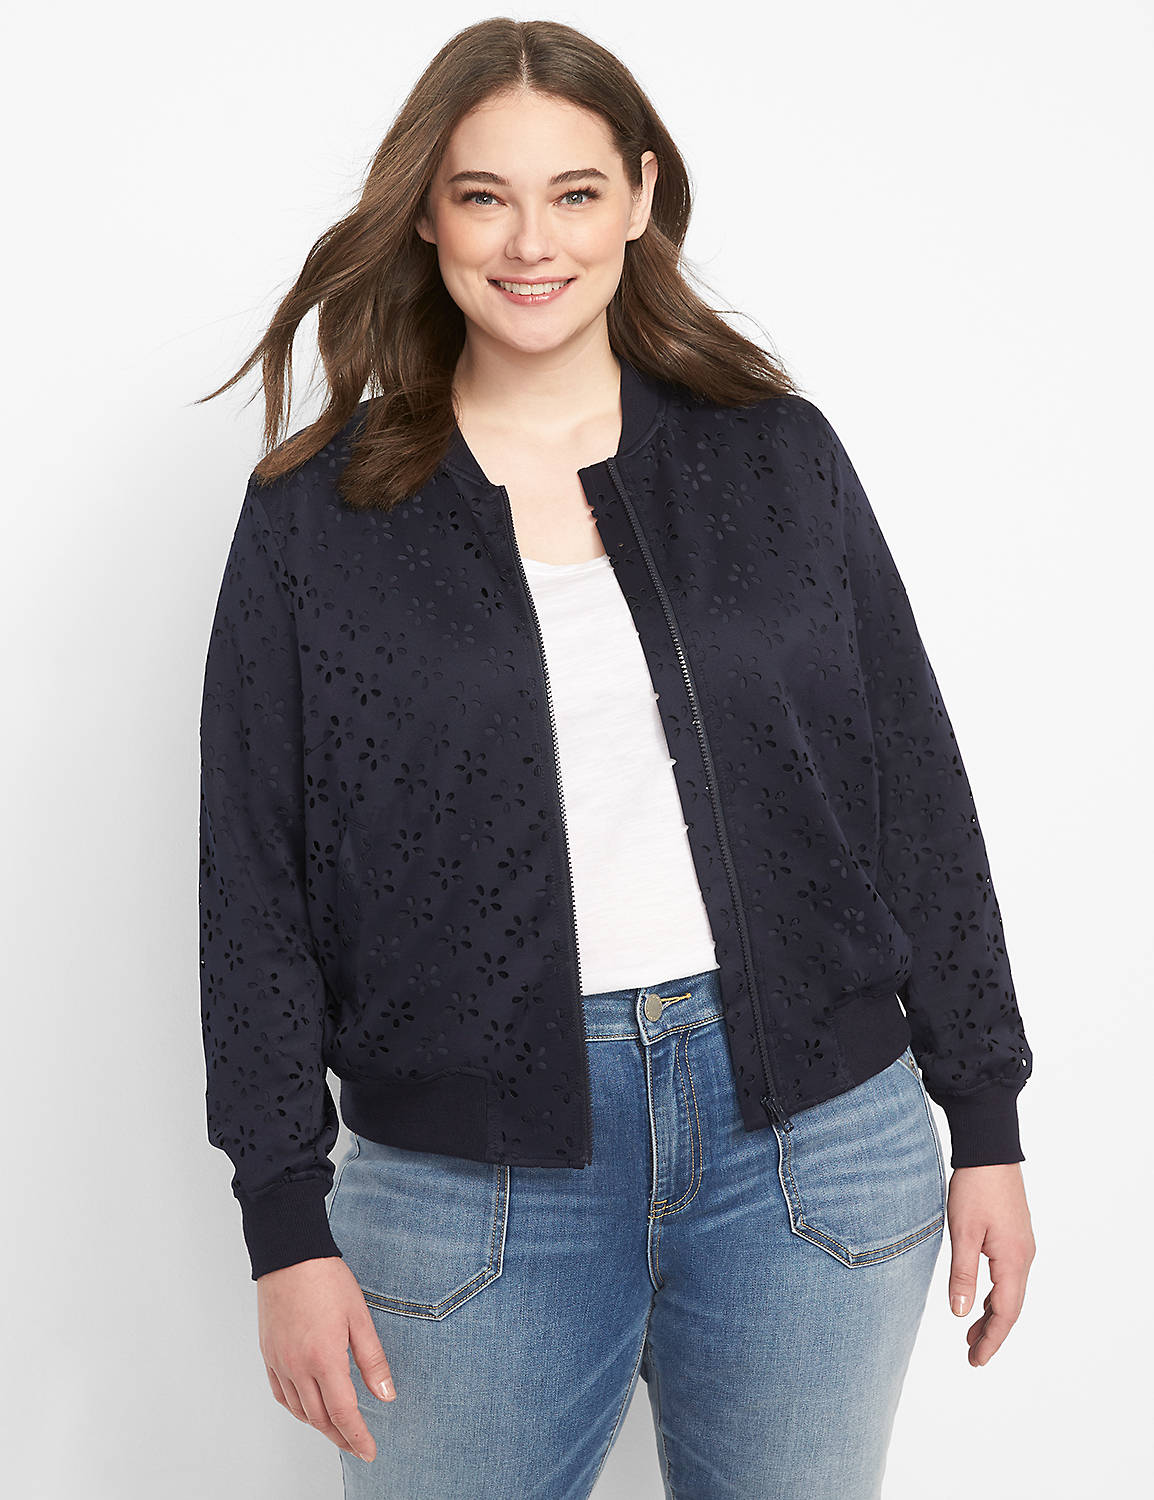 On-The-Go Laser Cut Bomber 1125200 Product Image 1